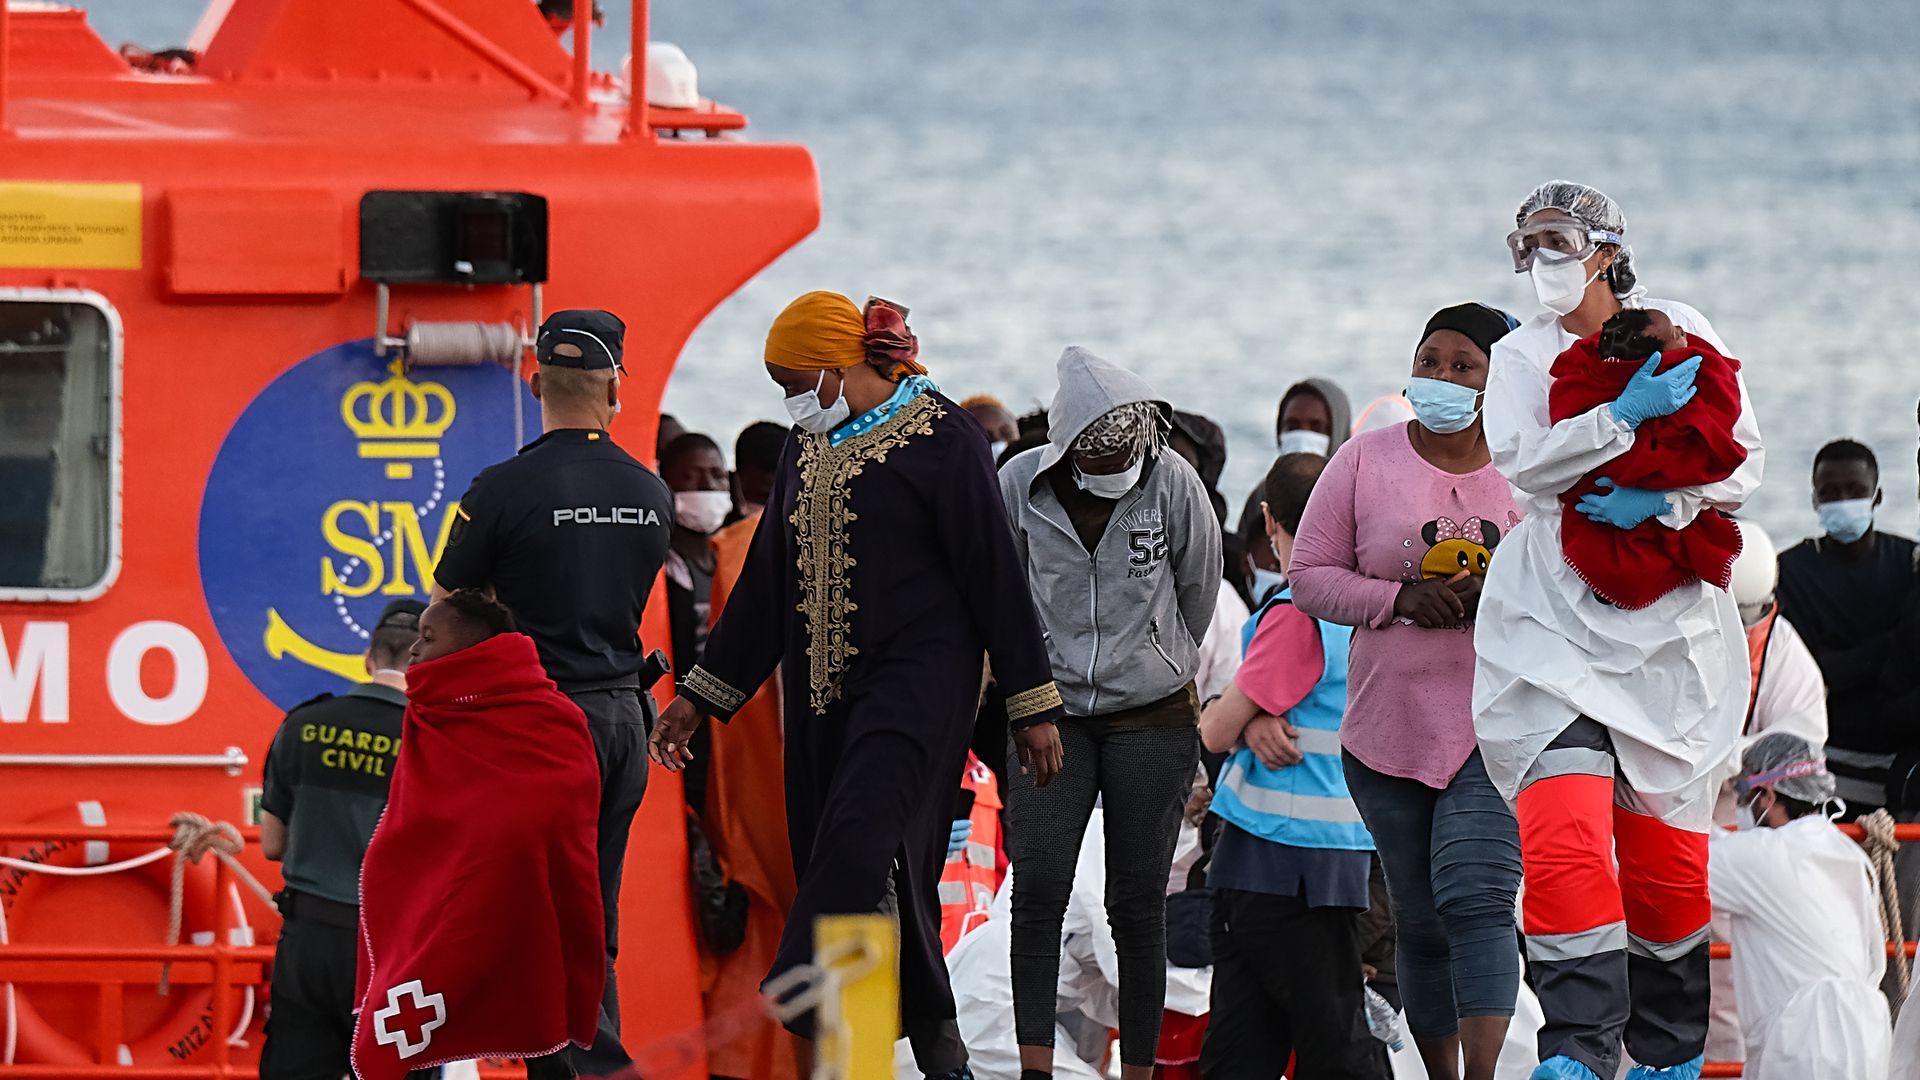 Sub-Saharan migrants disembark in the Canary Islands after being rescued at sea 